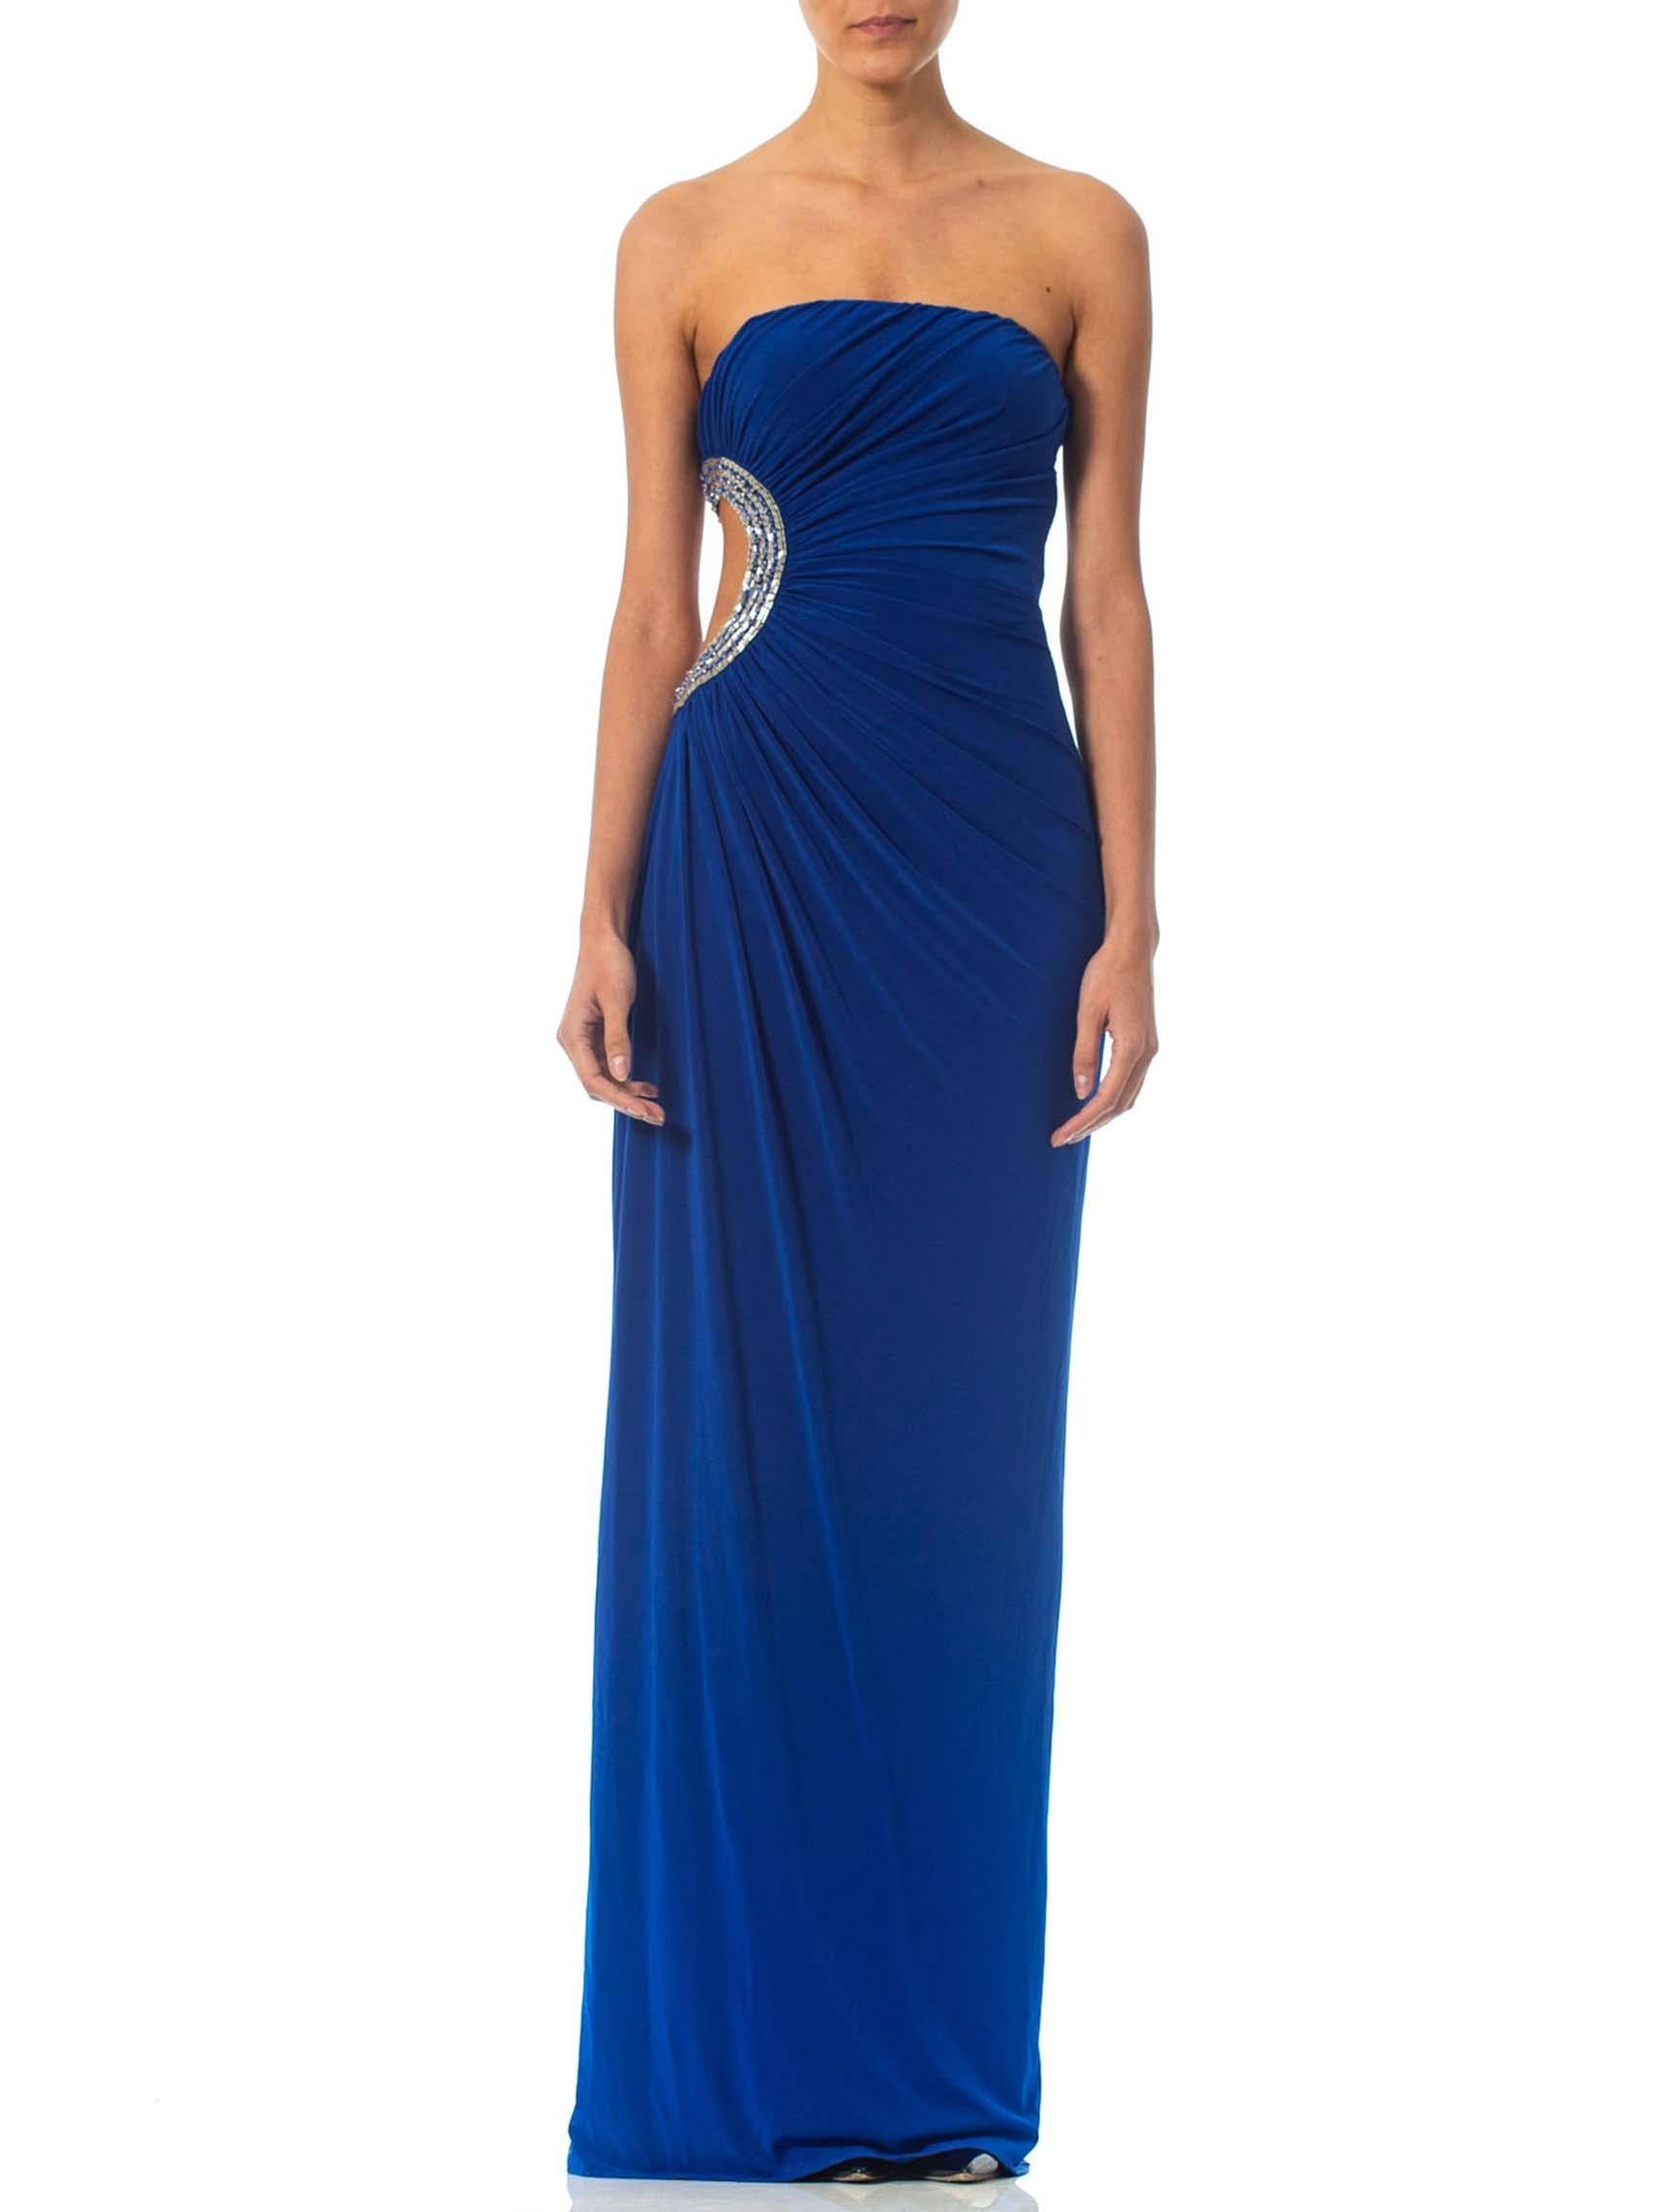 1990S Cobalt Blue Strapless Poly Blend Jersey Gown With Crystal Cut-Out Side For Sale 1